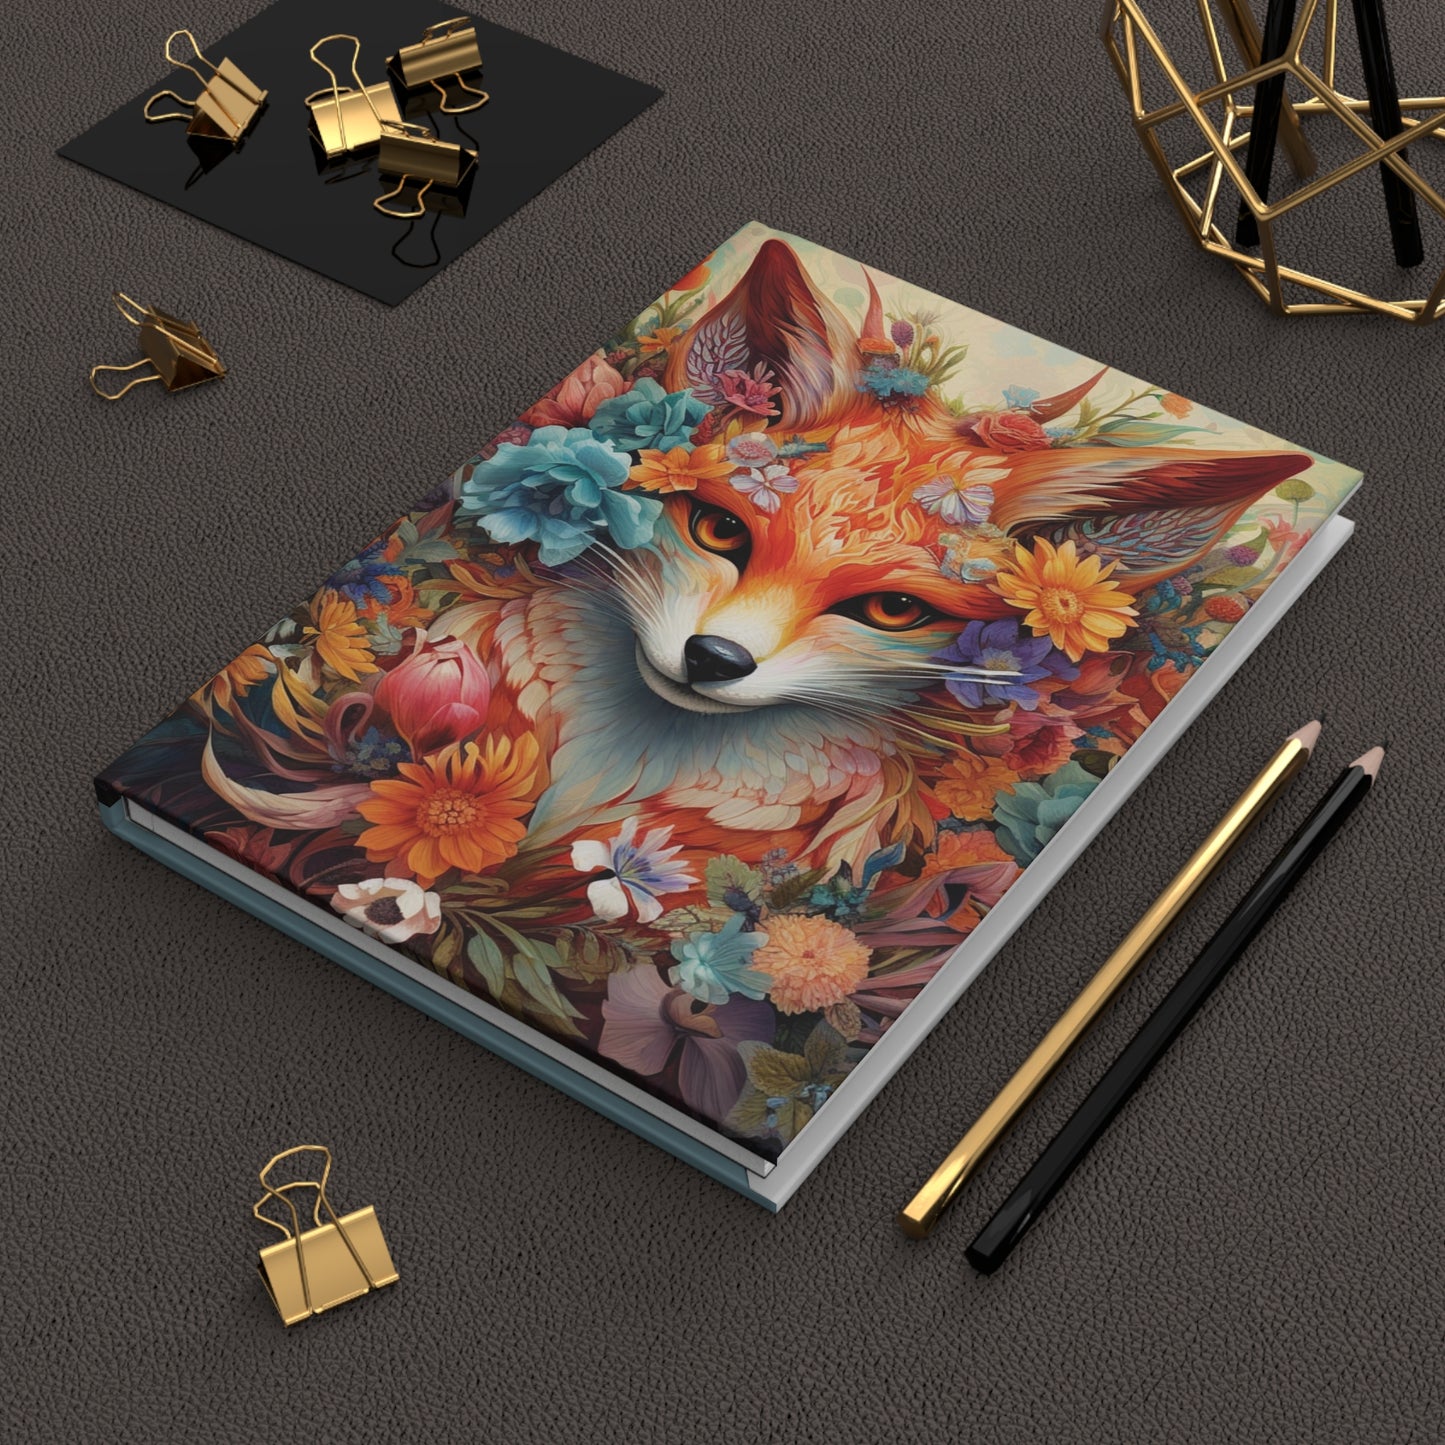 Floral Fox Hardcover Notebook - Artistic Journal, Lined, Creative Writing, Gratitude and Wellness Diary, Gift for Nature Lovers, 5.75"x7.5"